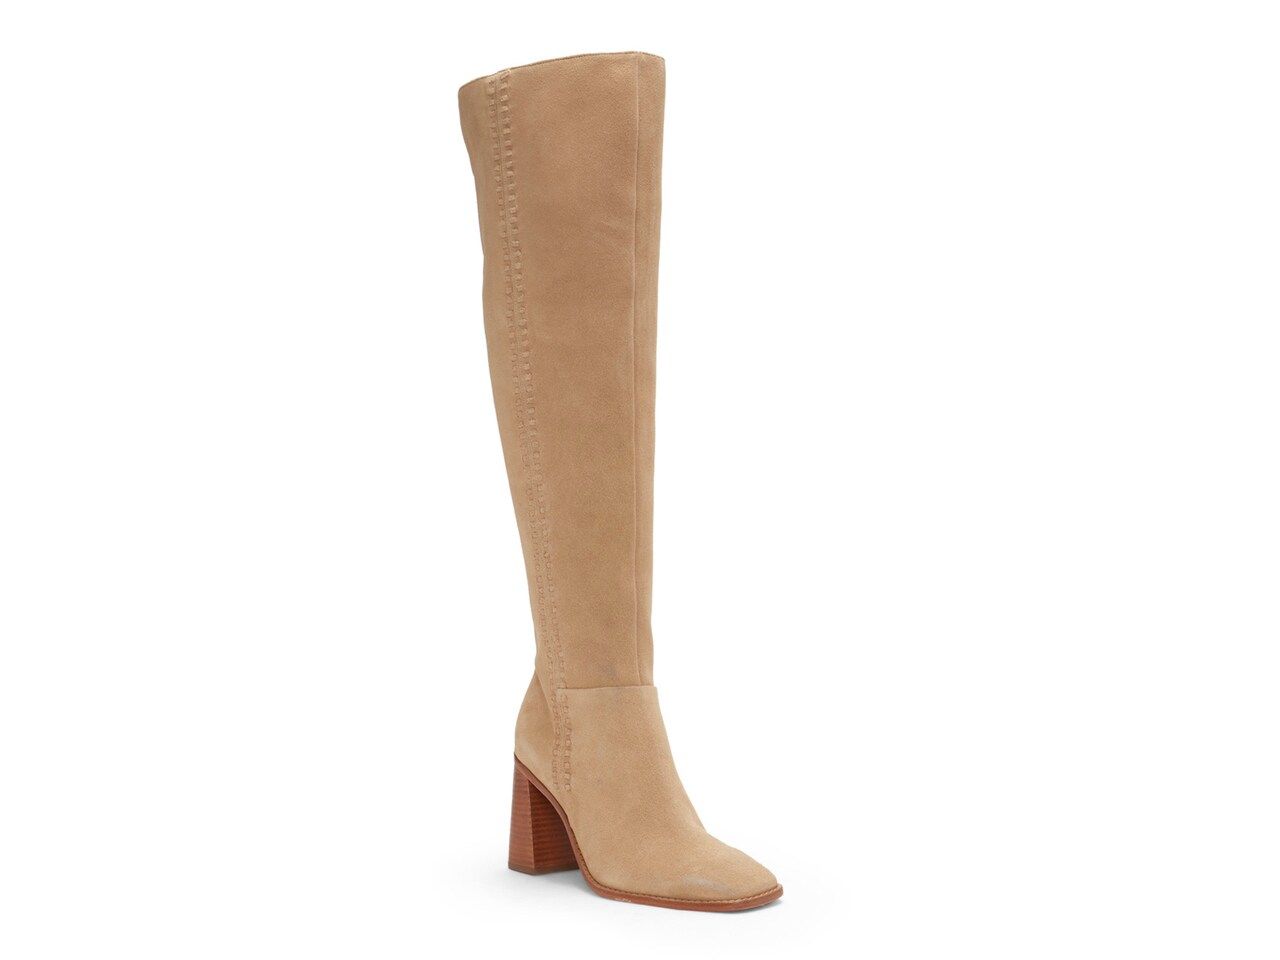 Vince Camuto Englea Over-the-Knee Boot | DSW